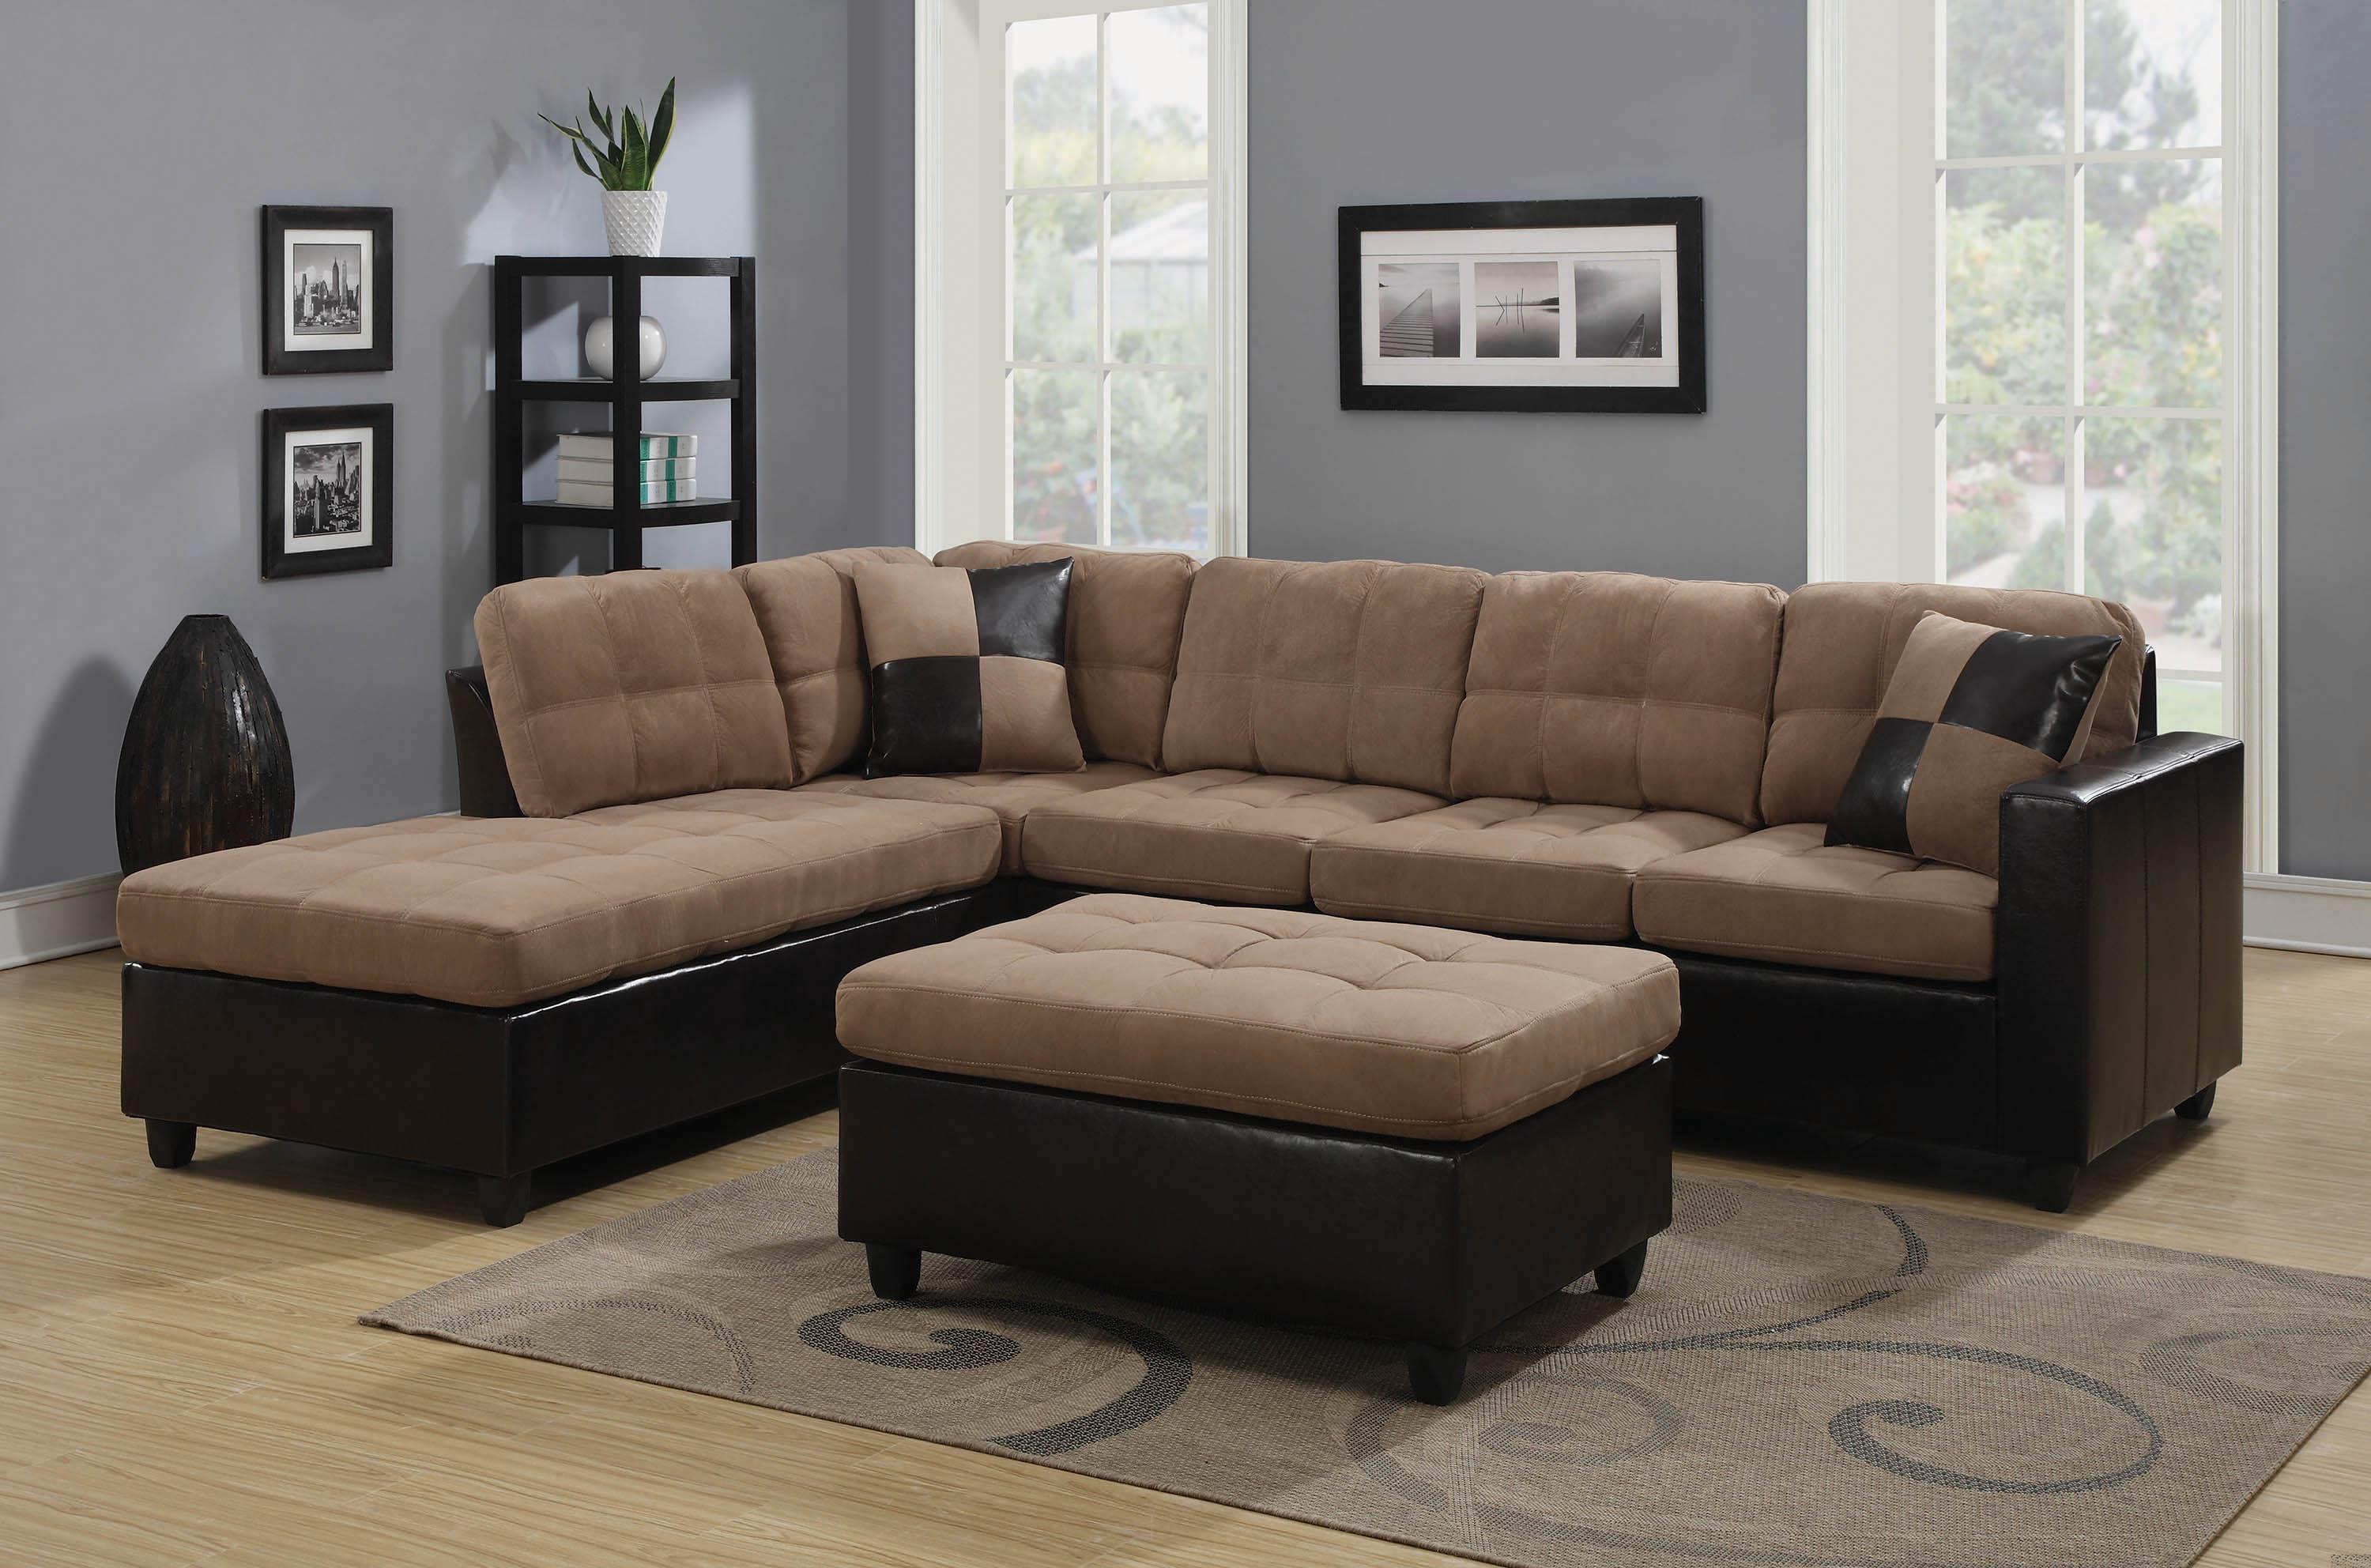 Contemporary Sectional Set 505675-2S Mallory 505675-2S in Tan Microfiber